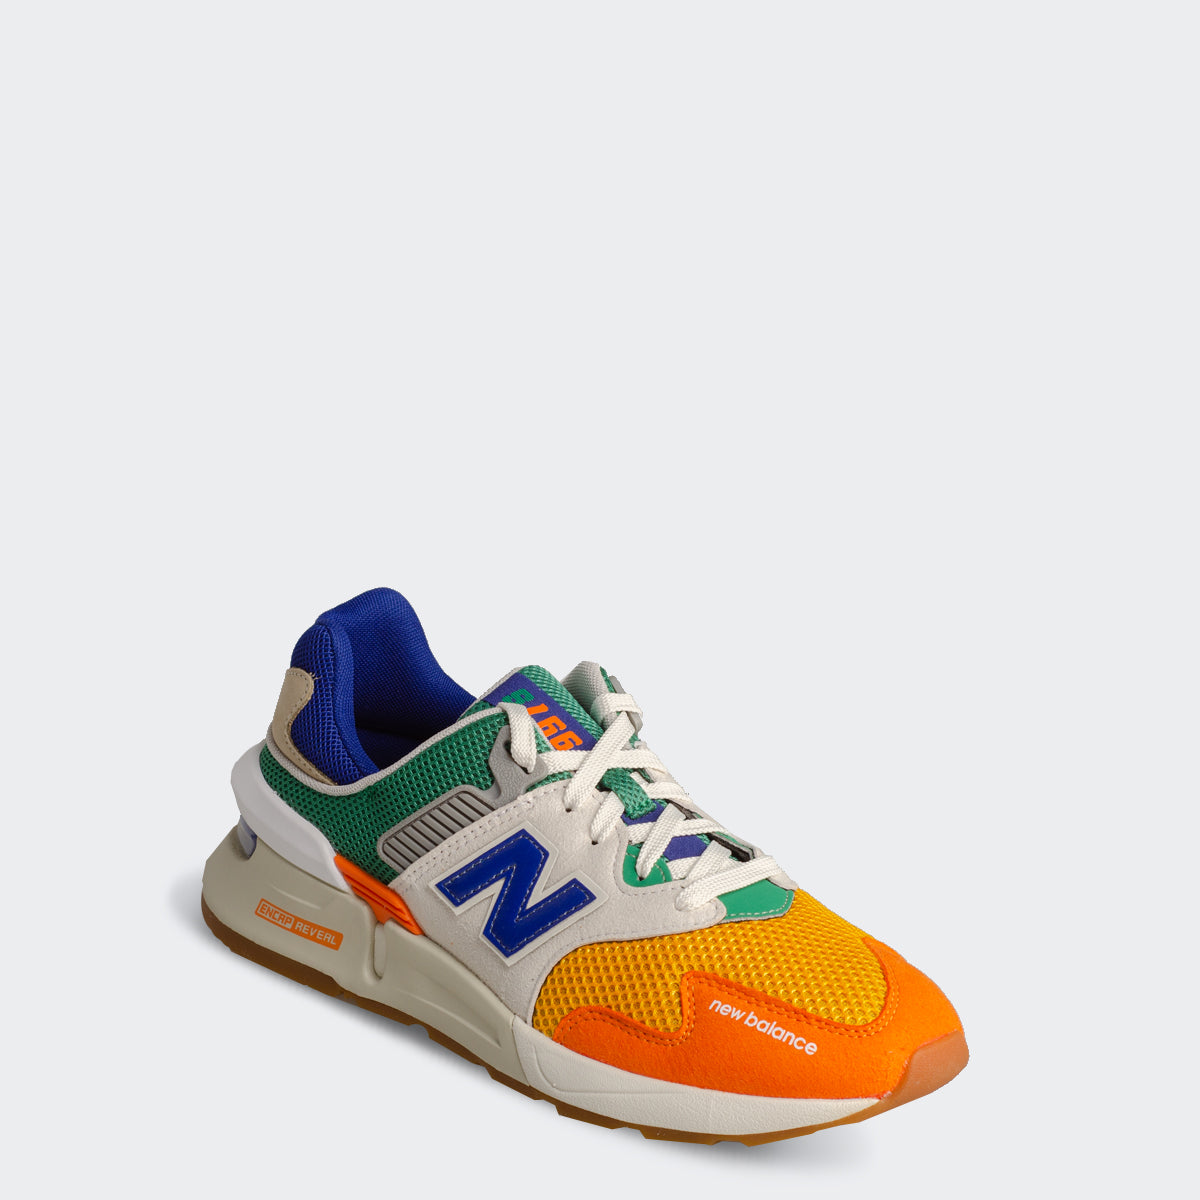 New Balance 997 Sport Shoes Multicolor MS997JHX | Chicago City Sports